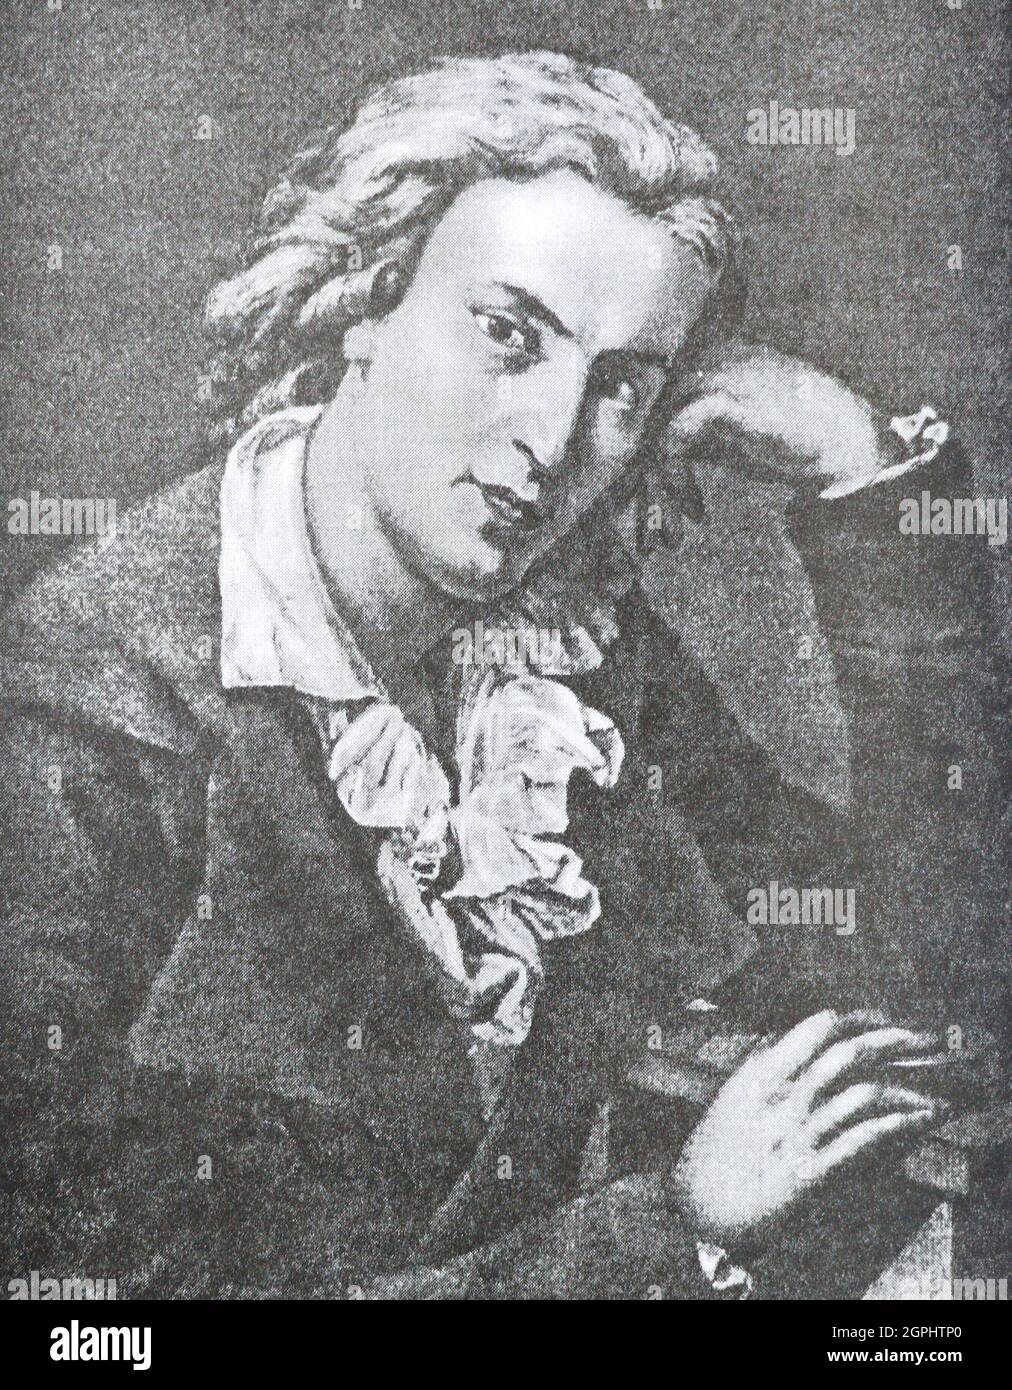 Johann Christoph Friedrich (von) Schiller (1759-1805) was a German playwright, poet, and philosopher. During the last seventeen years of his life (1788-1805), Schiller developed a productive, if complicated, friendship with the already famous and influential Johann Wolfgang von Goethe. They frequently discussed issues concerning aesthetics, and Schiller encouraged Goethe to finish works that he had left as sketches. Stock Photo